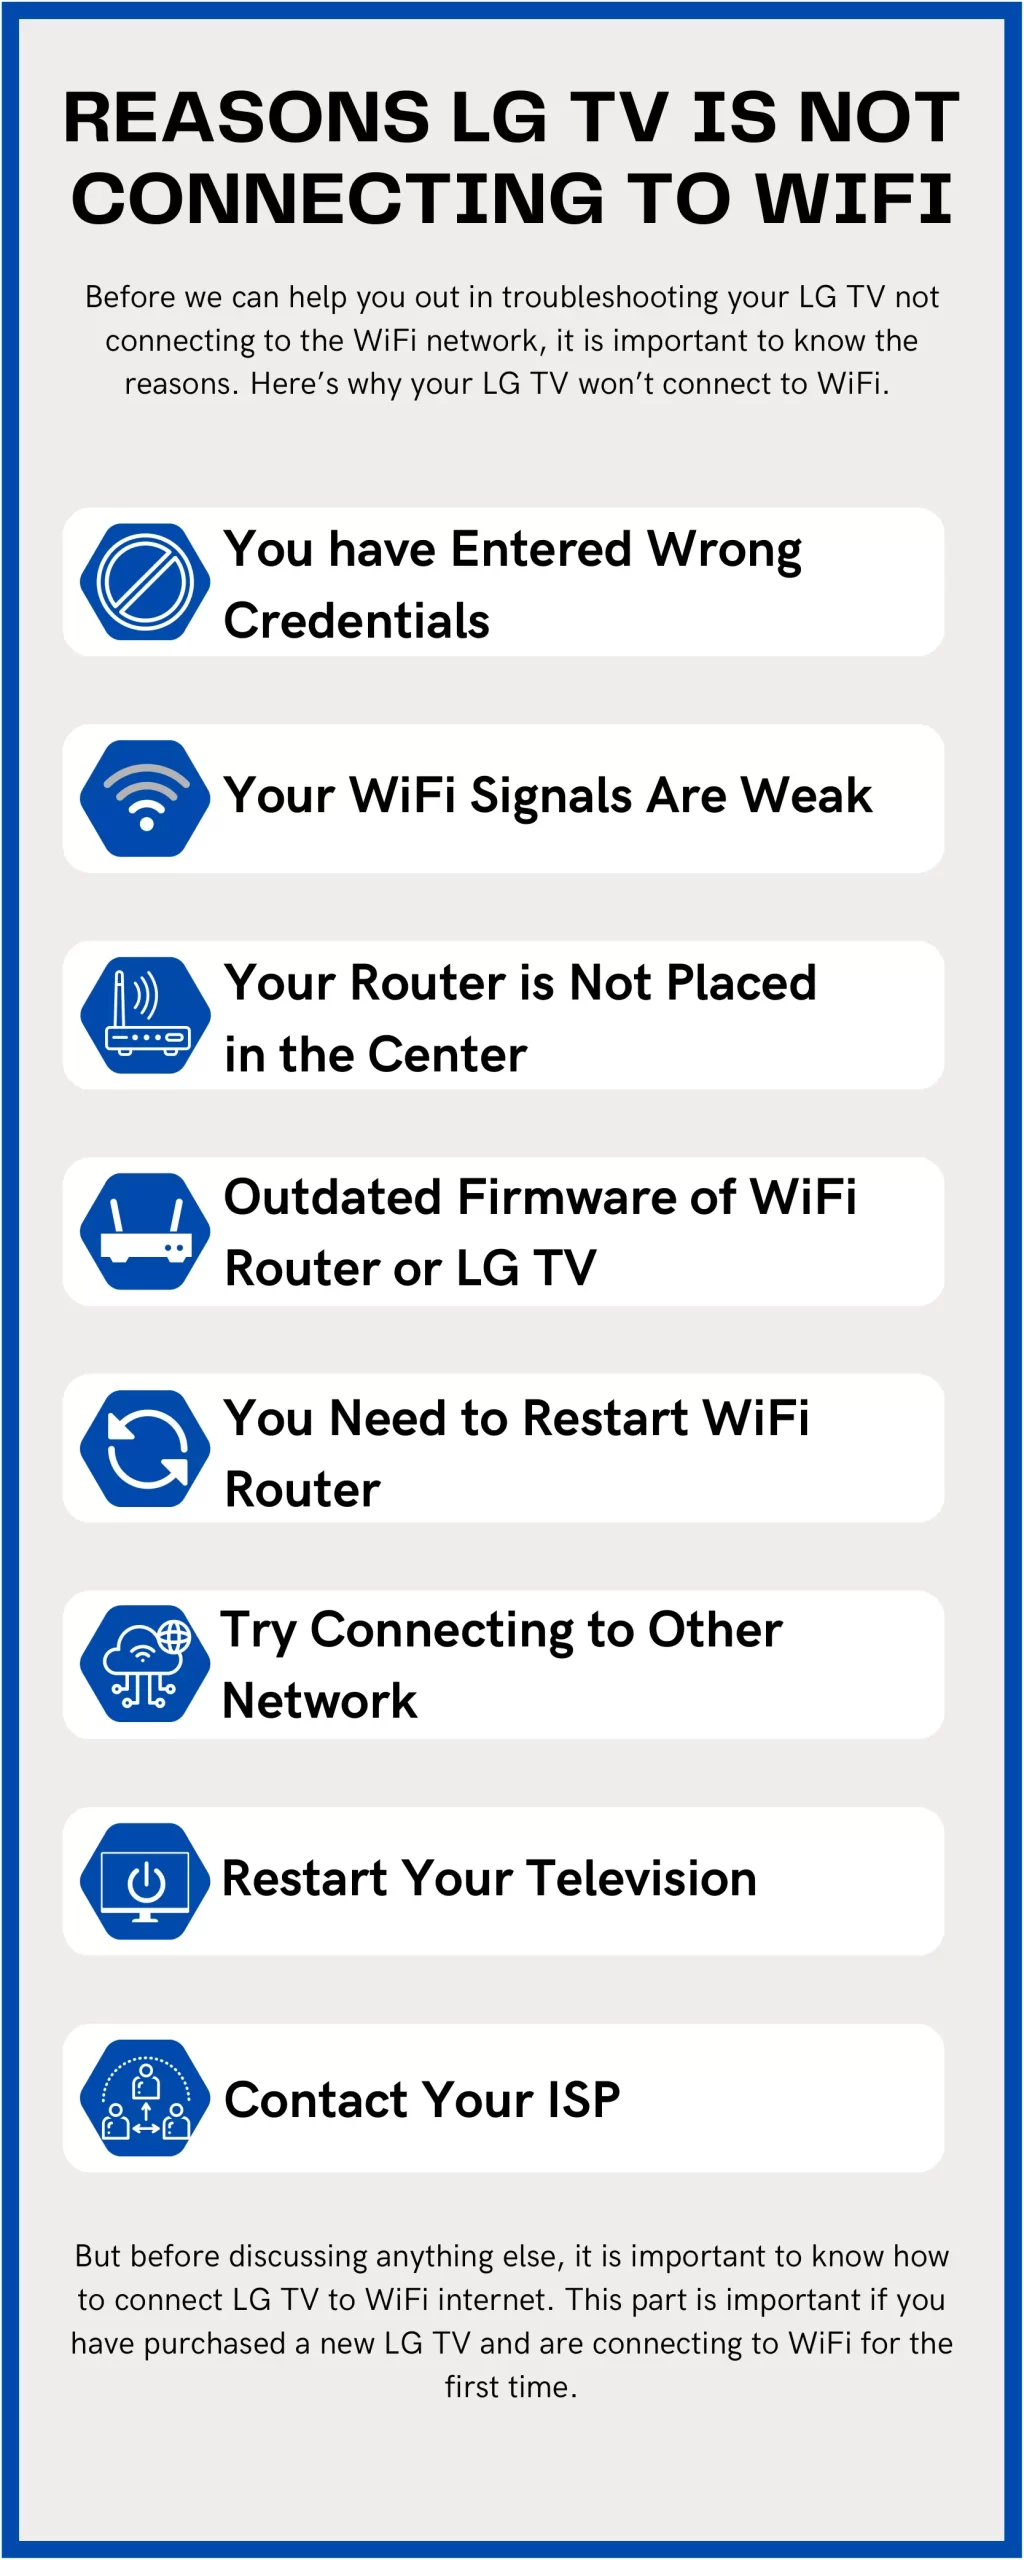 Infographic of Reasons LG TV Is Not Connecting To WiFi